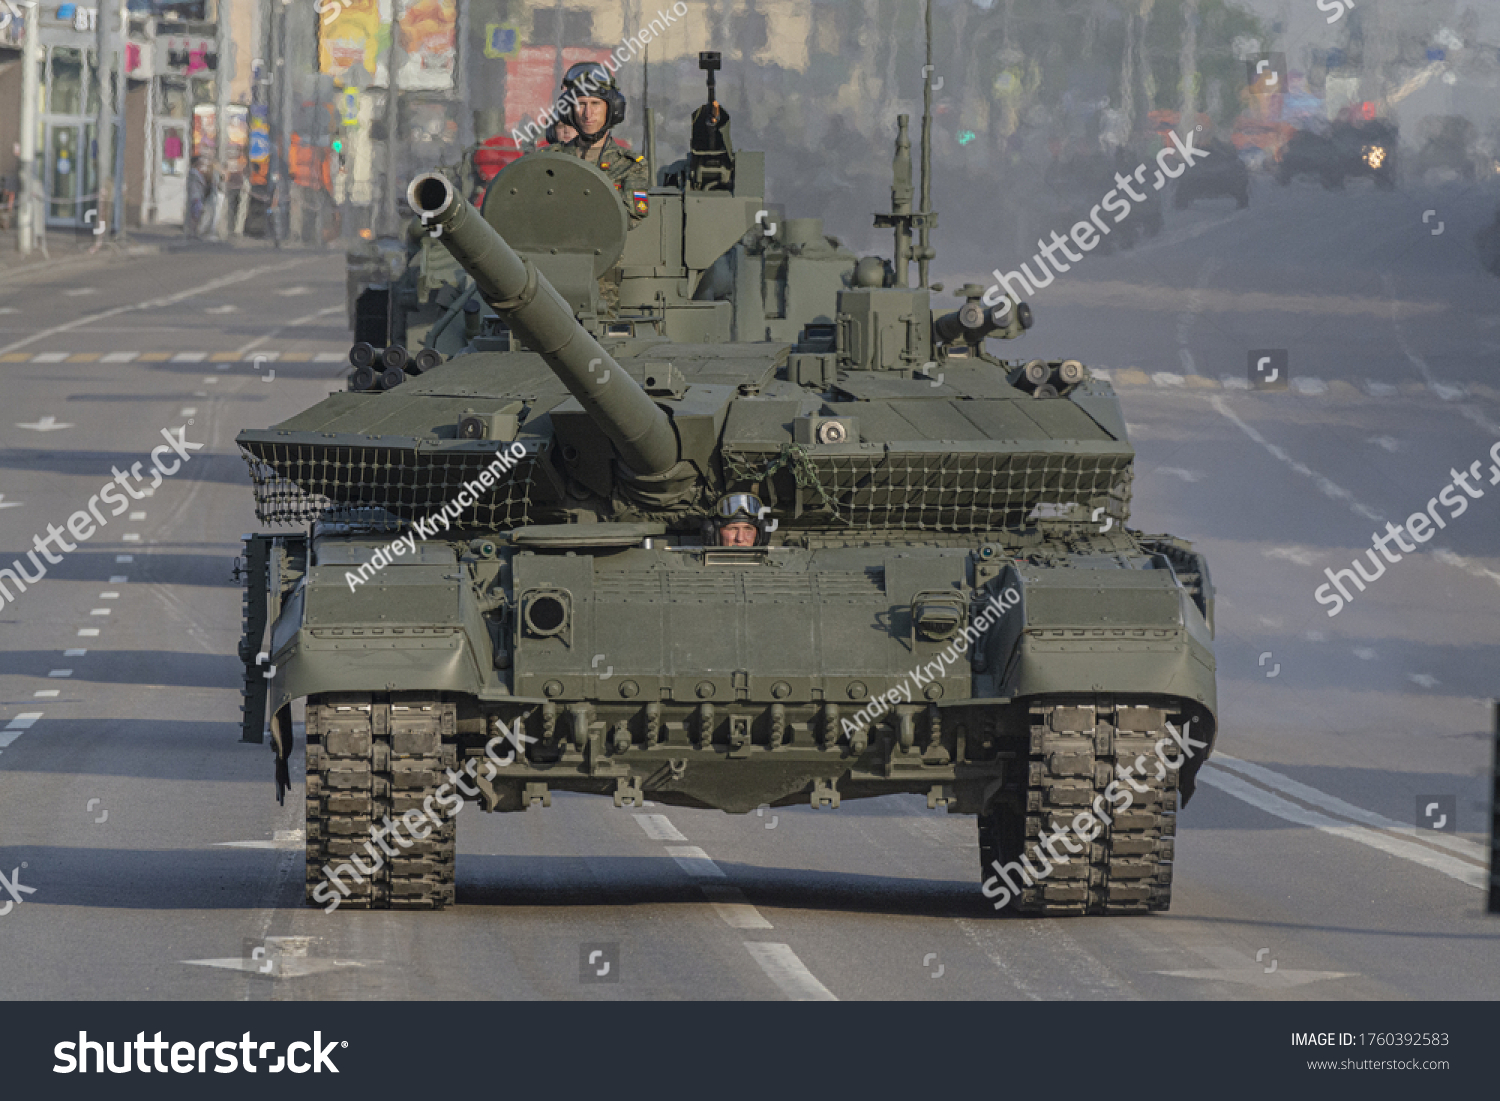 https://image.shutterstock.com/z/stock-photo-june-moscow-russia-the-t-m-tank-goes-to-red-square-to-participate-in-the-rehearsal-of-1760392583.jpg